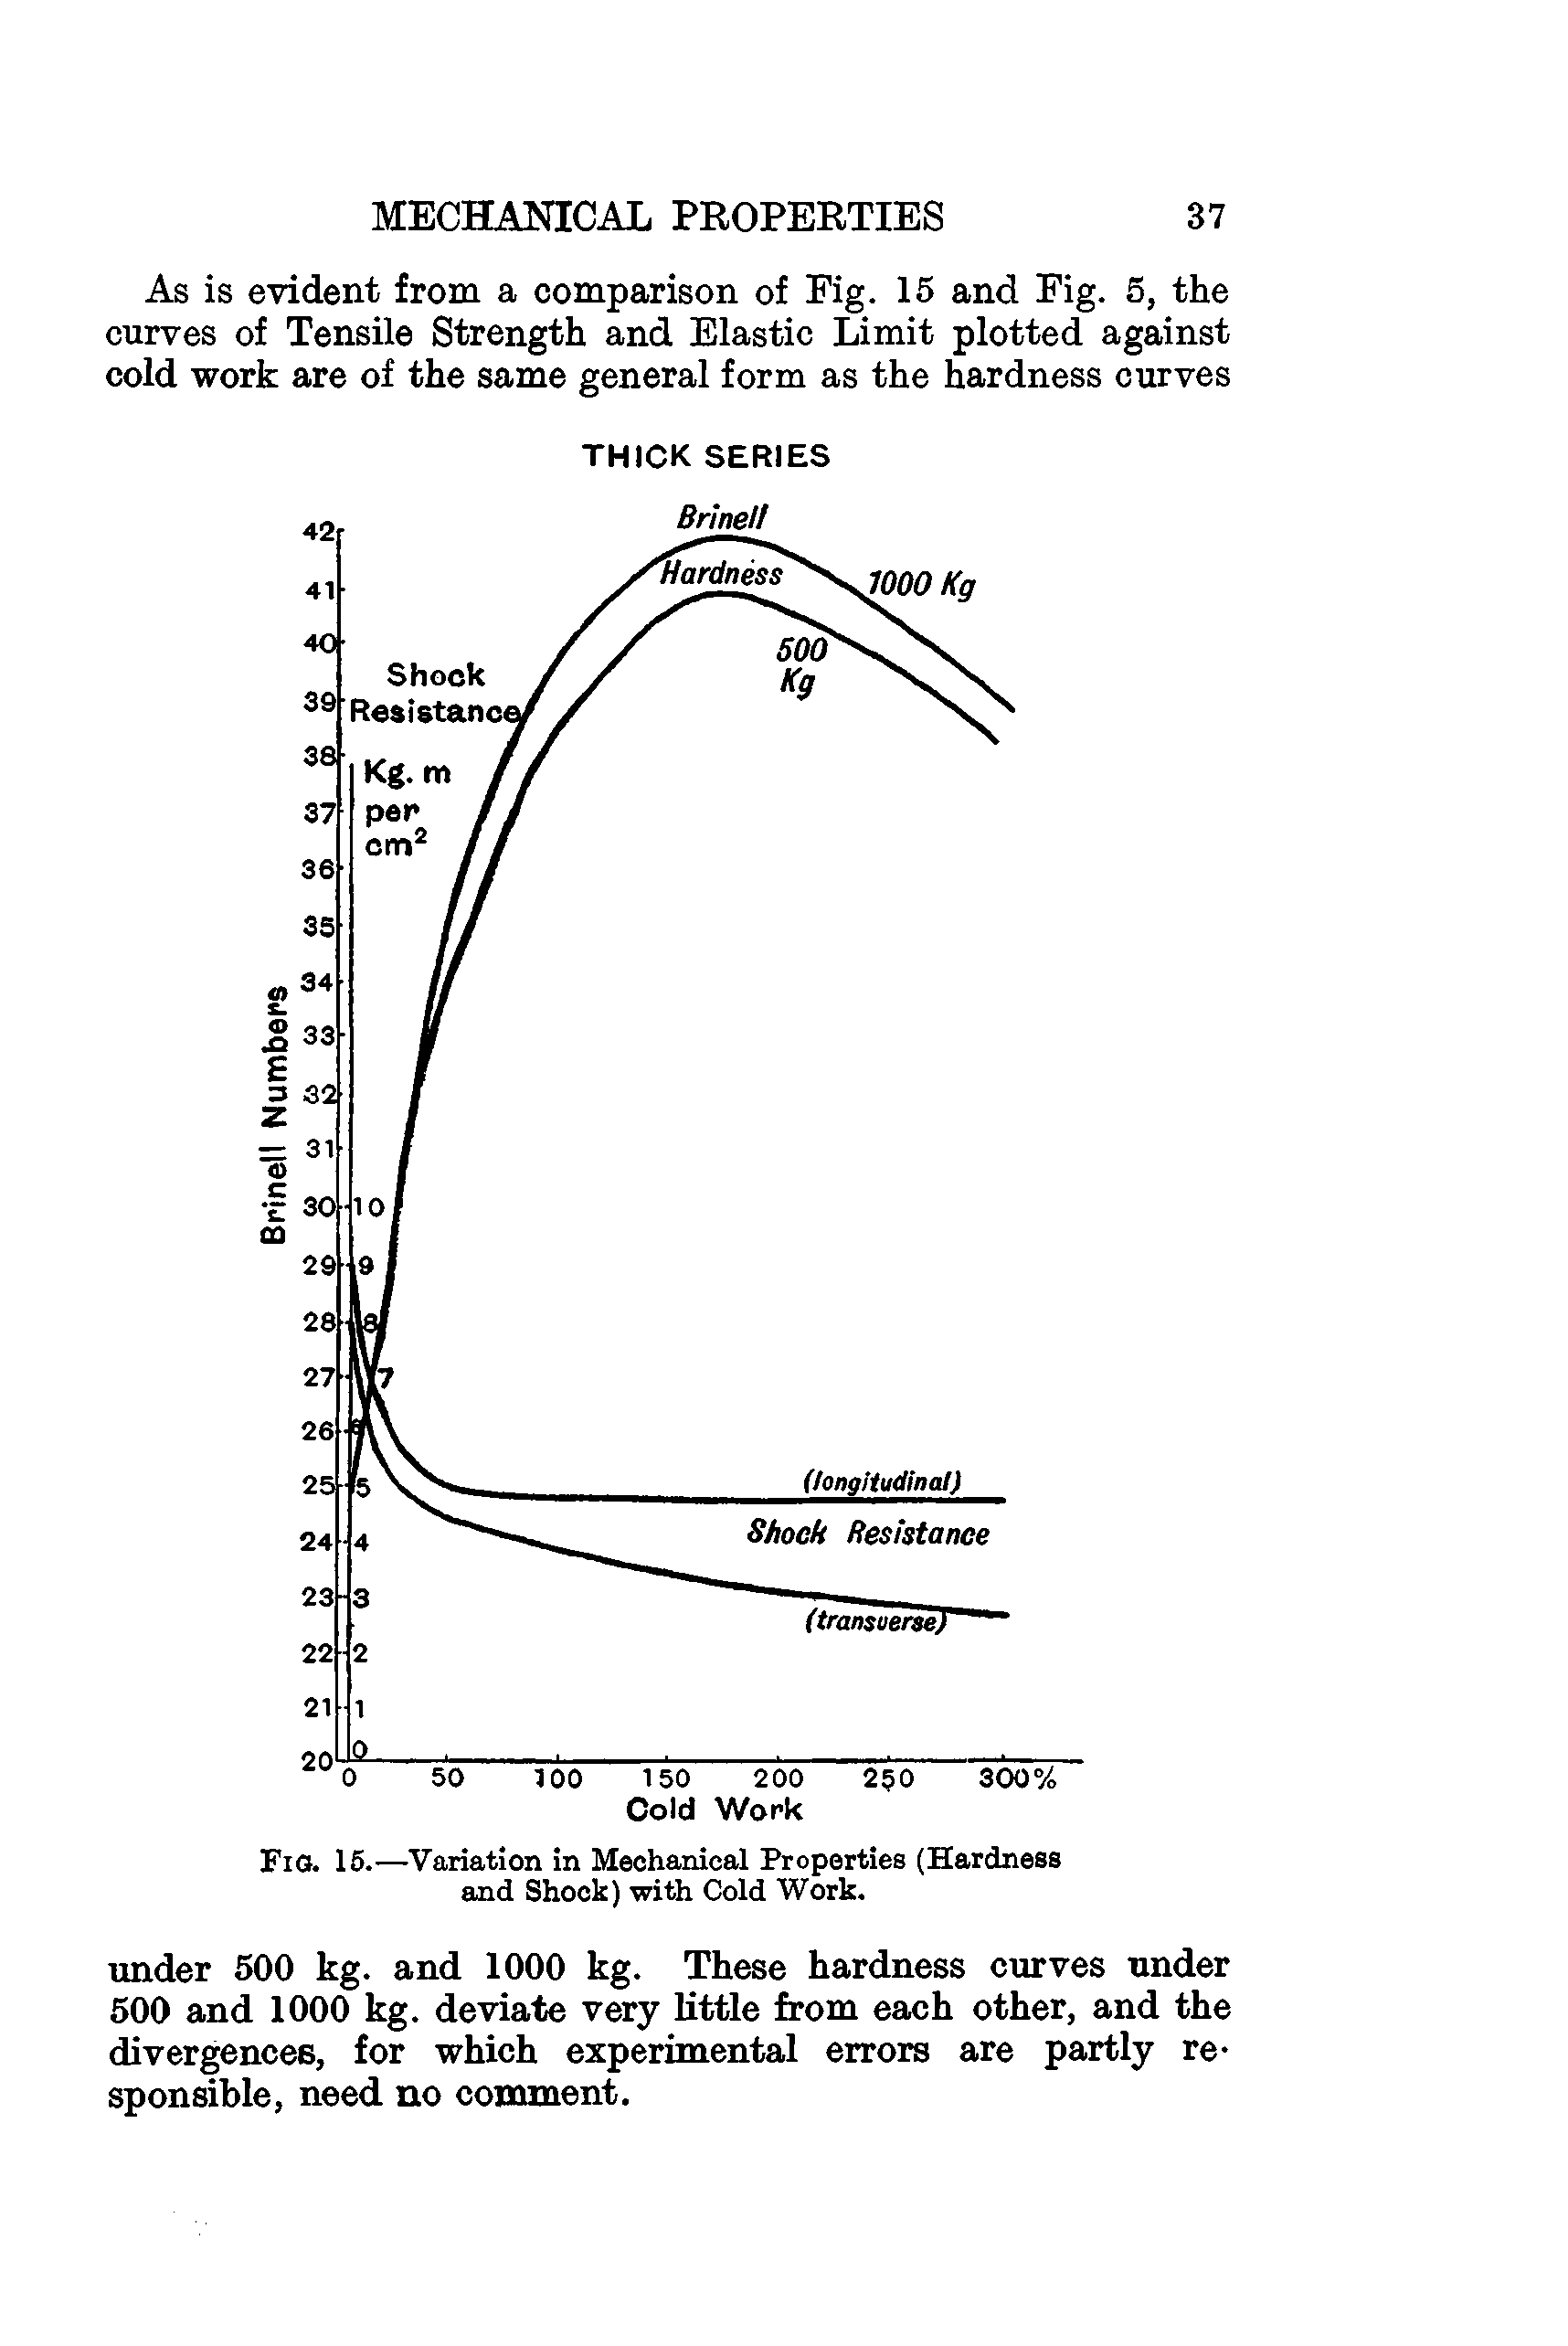 Fig. 15.—Variation in Mechanical Properties (Hardness and Shock) with Cold Work.